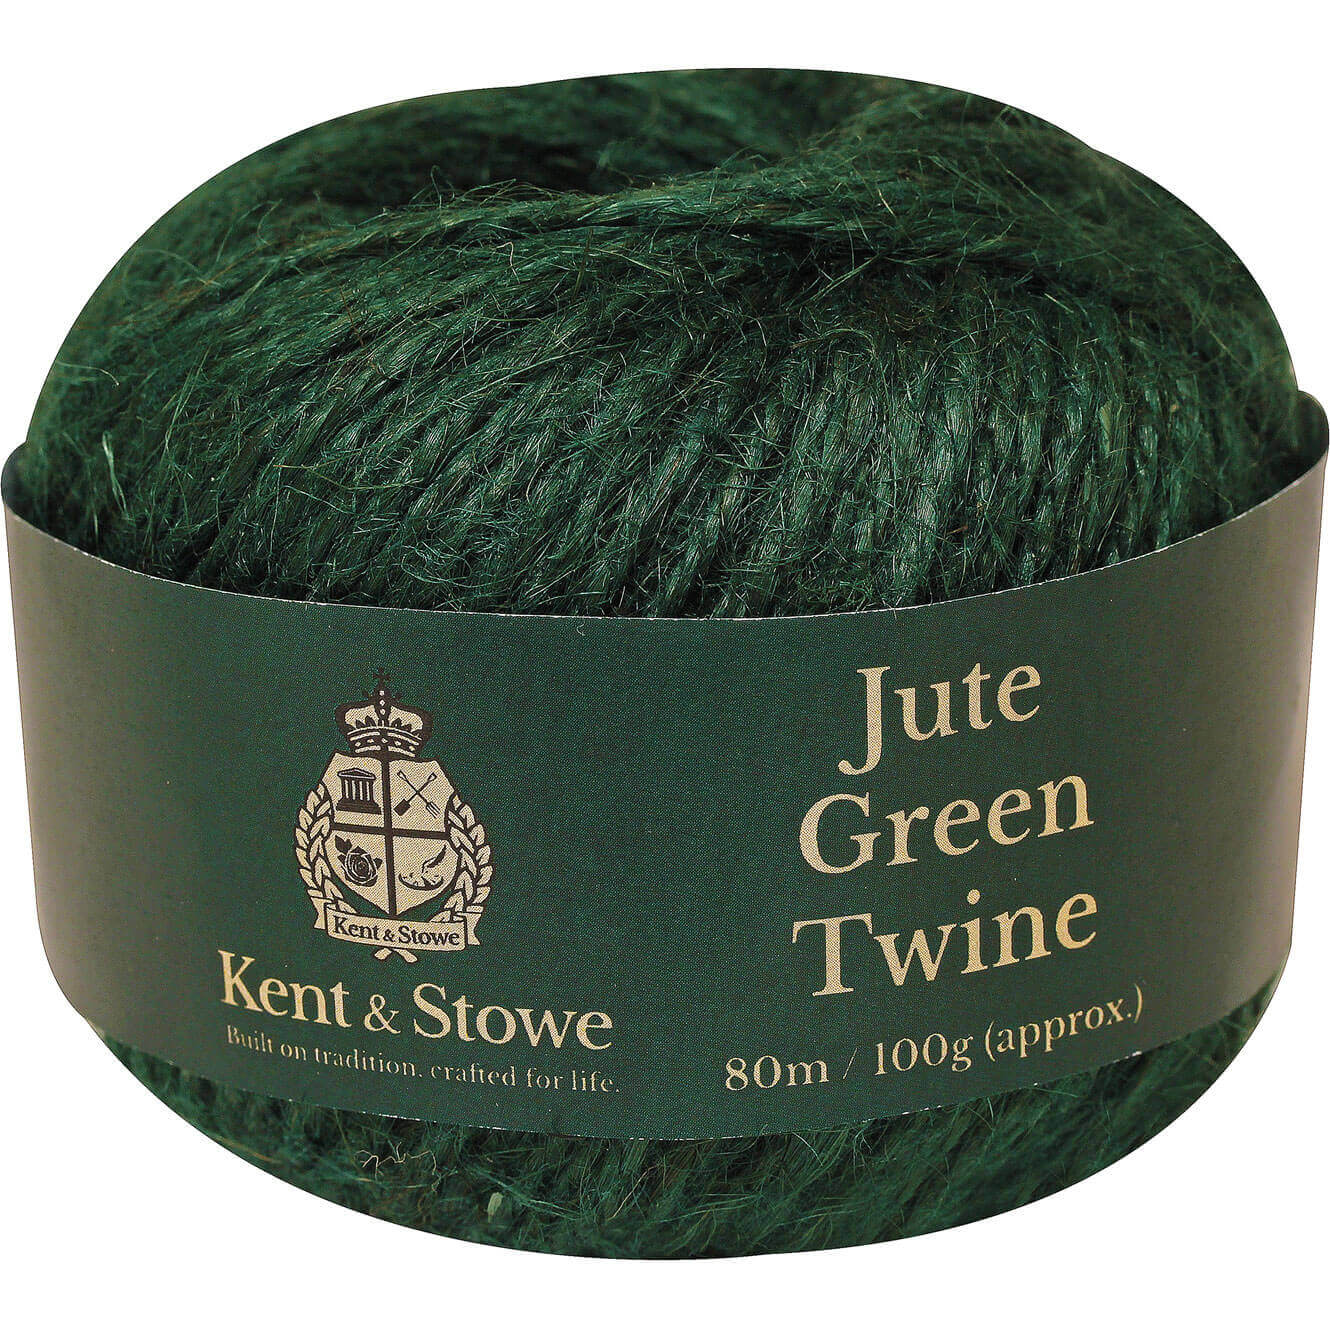 Image of Kent and Stowe Jute Garden Twine Green 80m